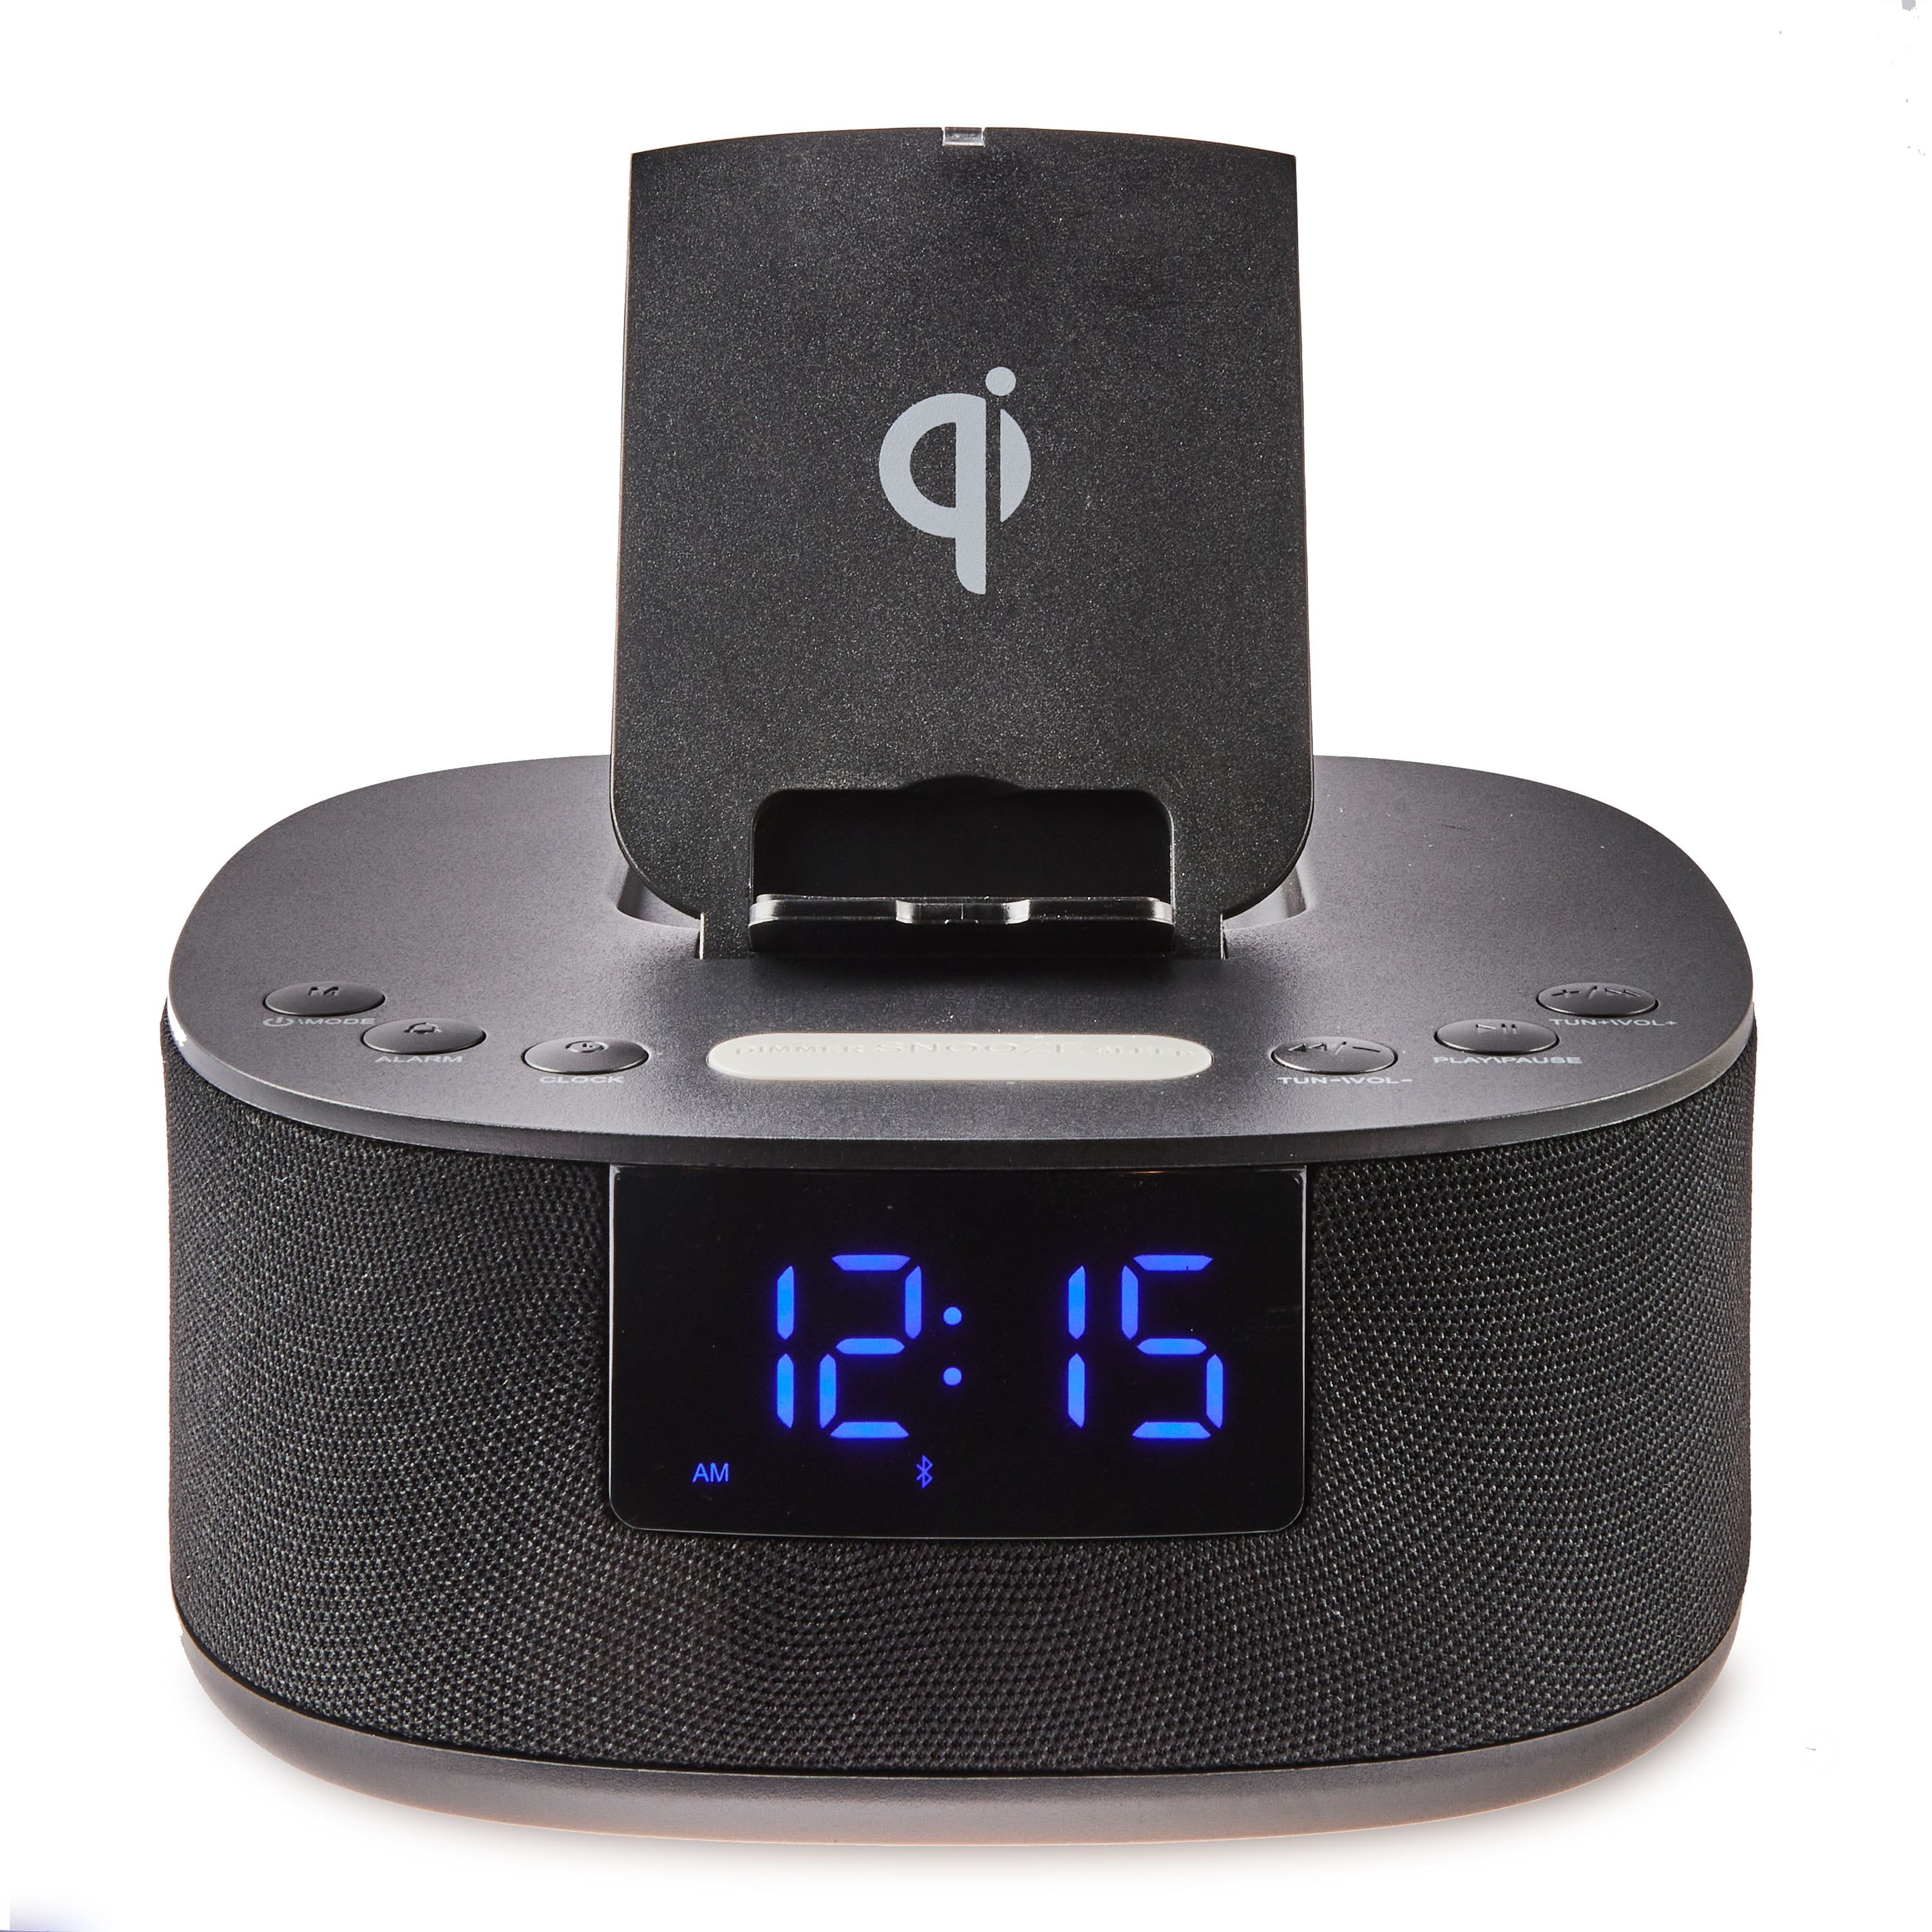 White Bluetooth CD Player Tabletop Boombox Stereo Clock Wireless Charging,Home Digital FM Radio Dual Alarm Clock Top-Loading Disc Players USB AUX Sleep Timer 